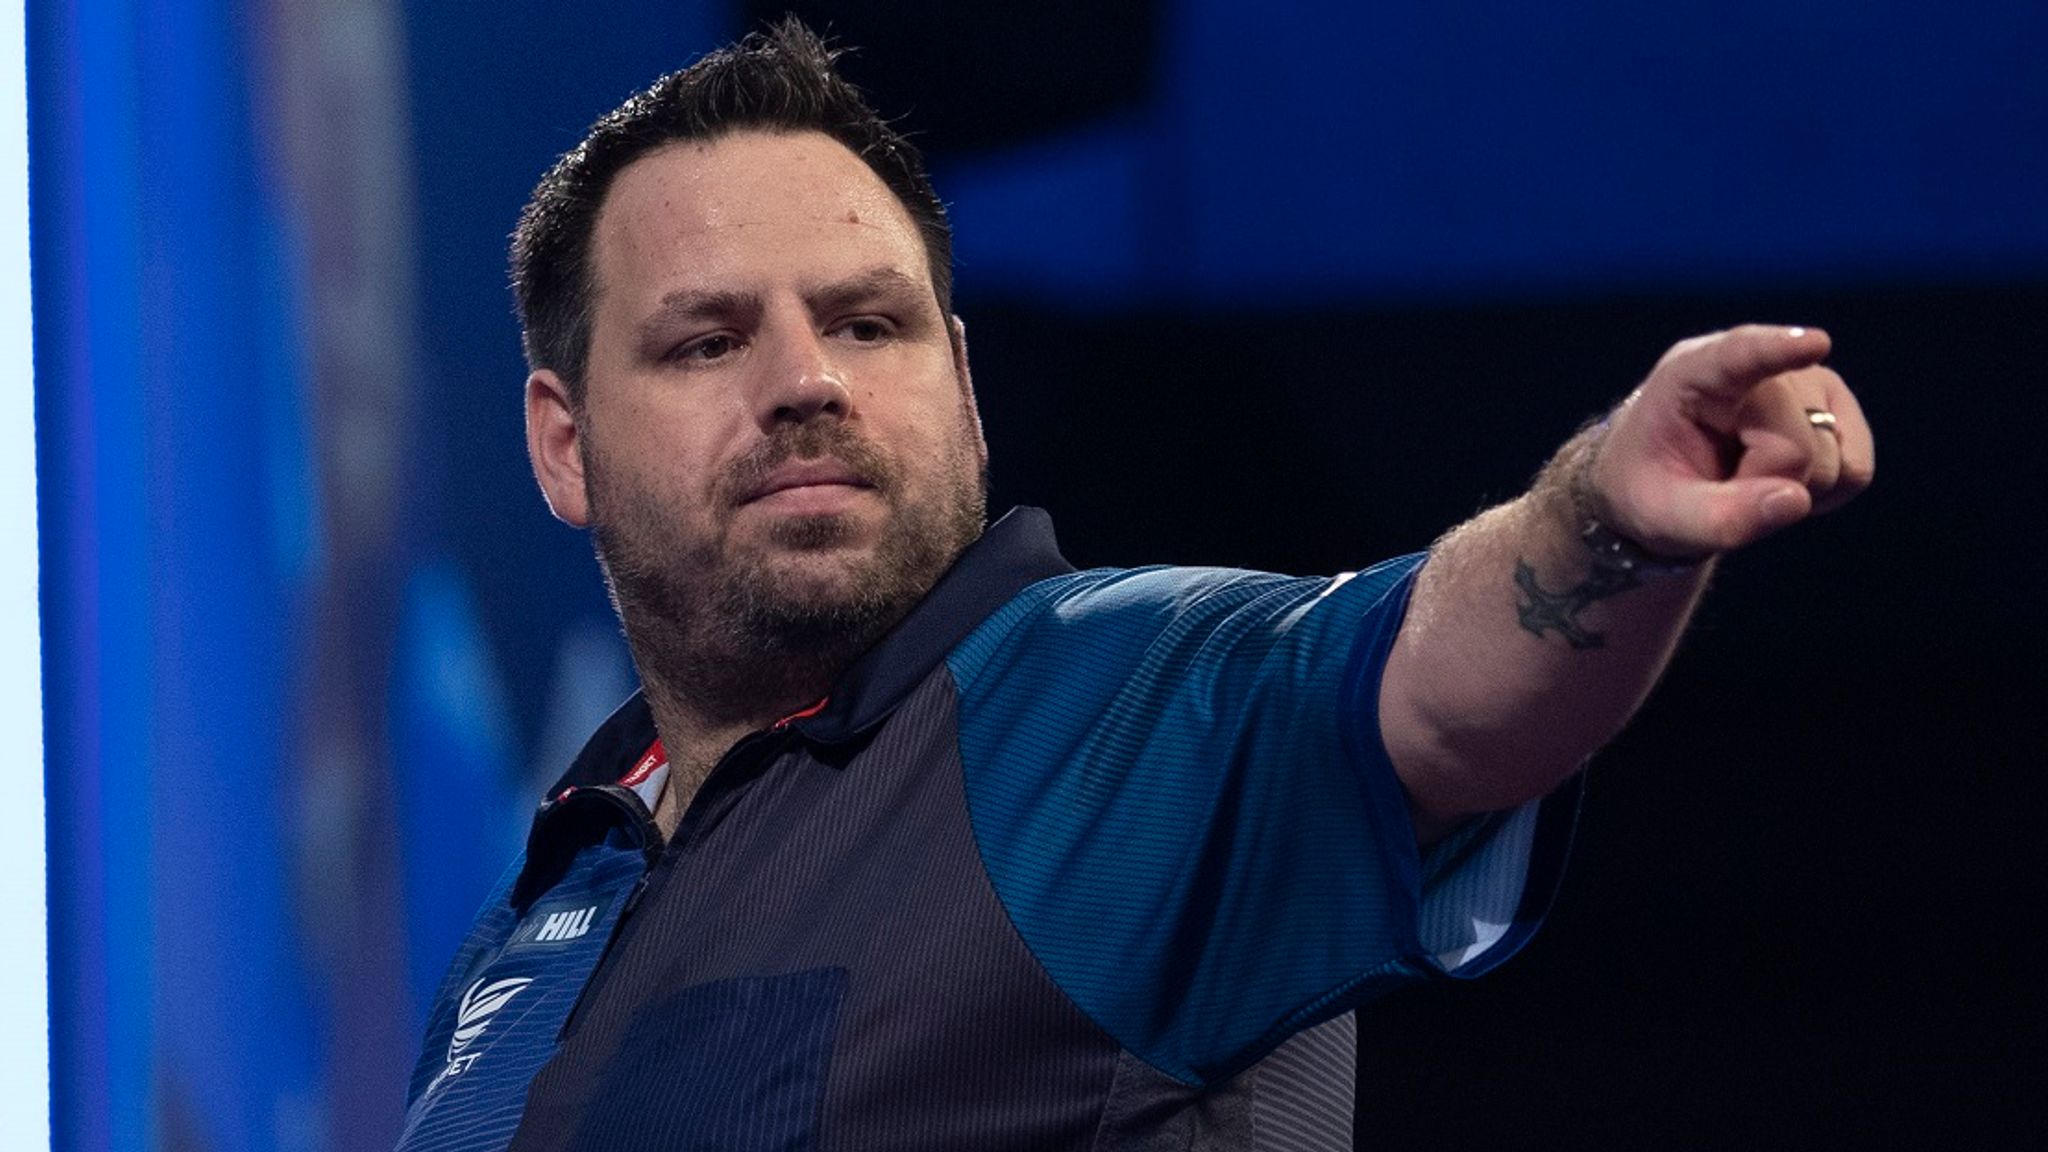 Players Championship: Adrian Lewis clinches ranking title since 2019 with over Boris | Darts News Sky Sports